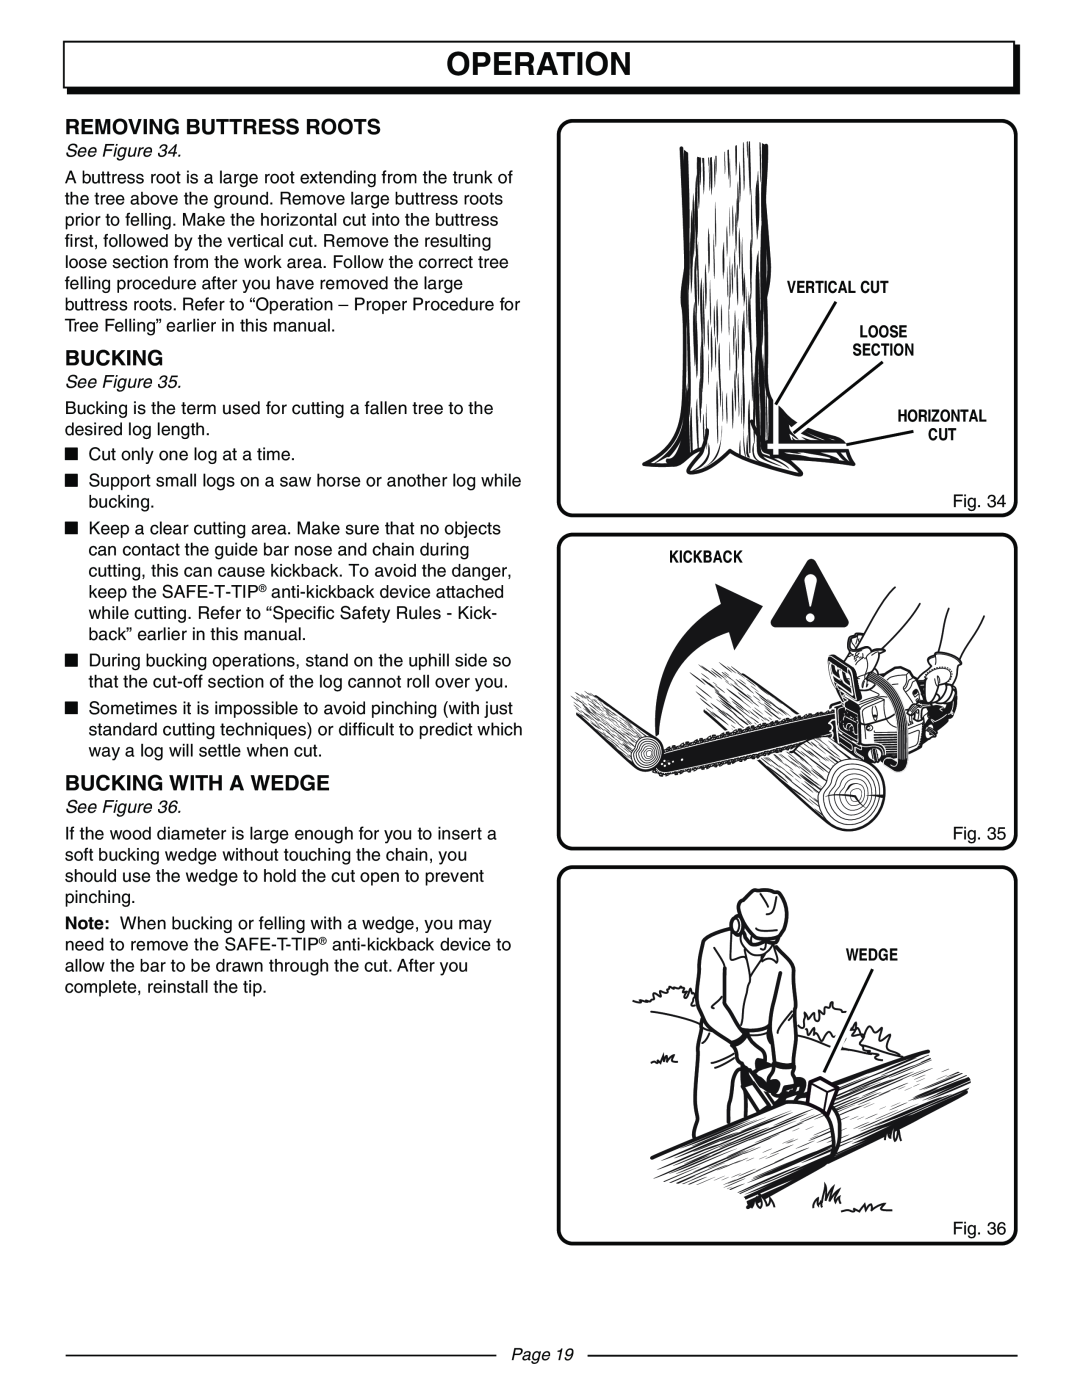 Homelite UT10570 manual Removing Buttress Roots, Bucking With A Wedge, Operation, See Figure, Page 